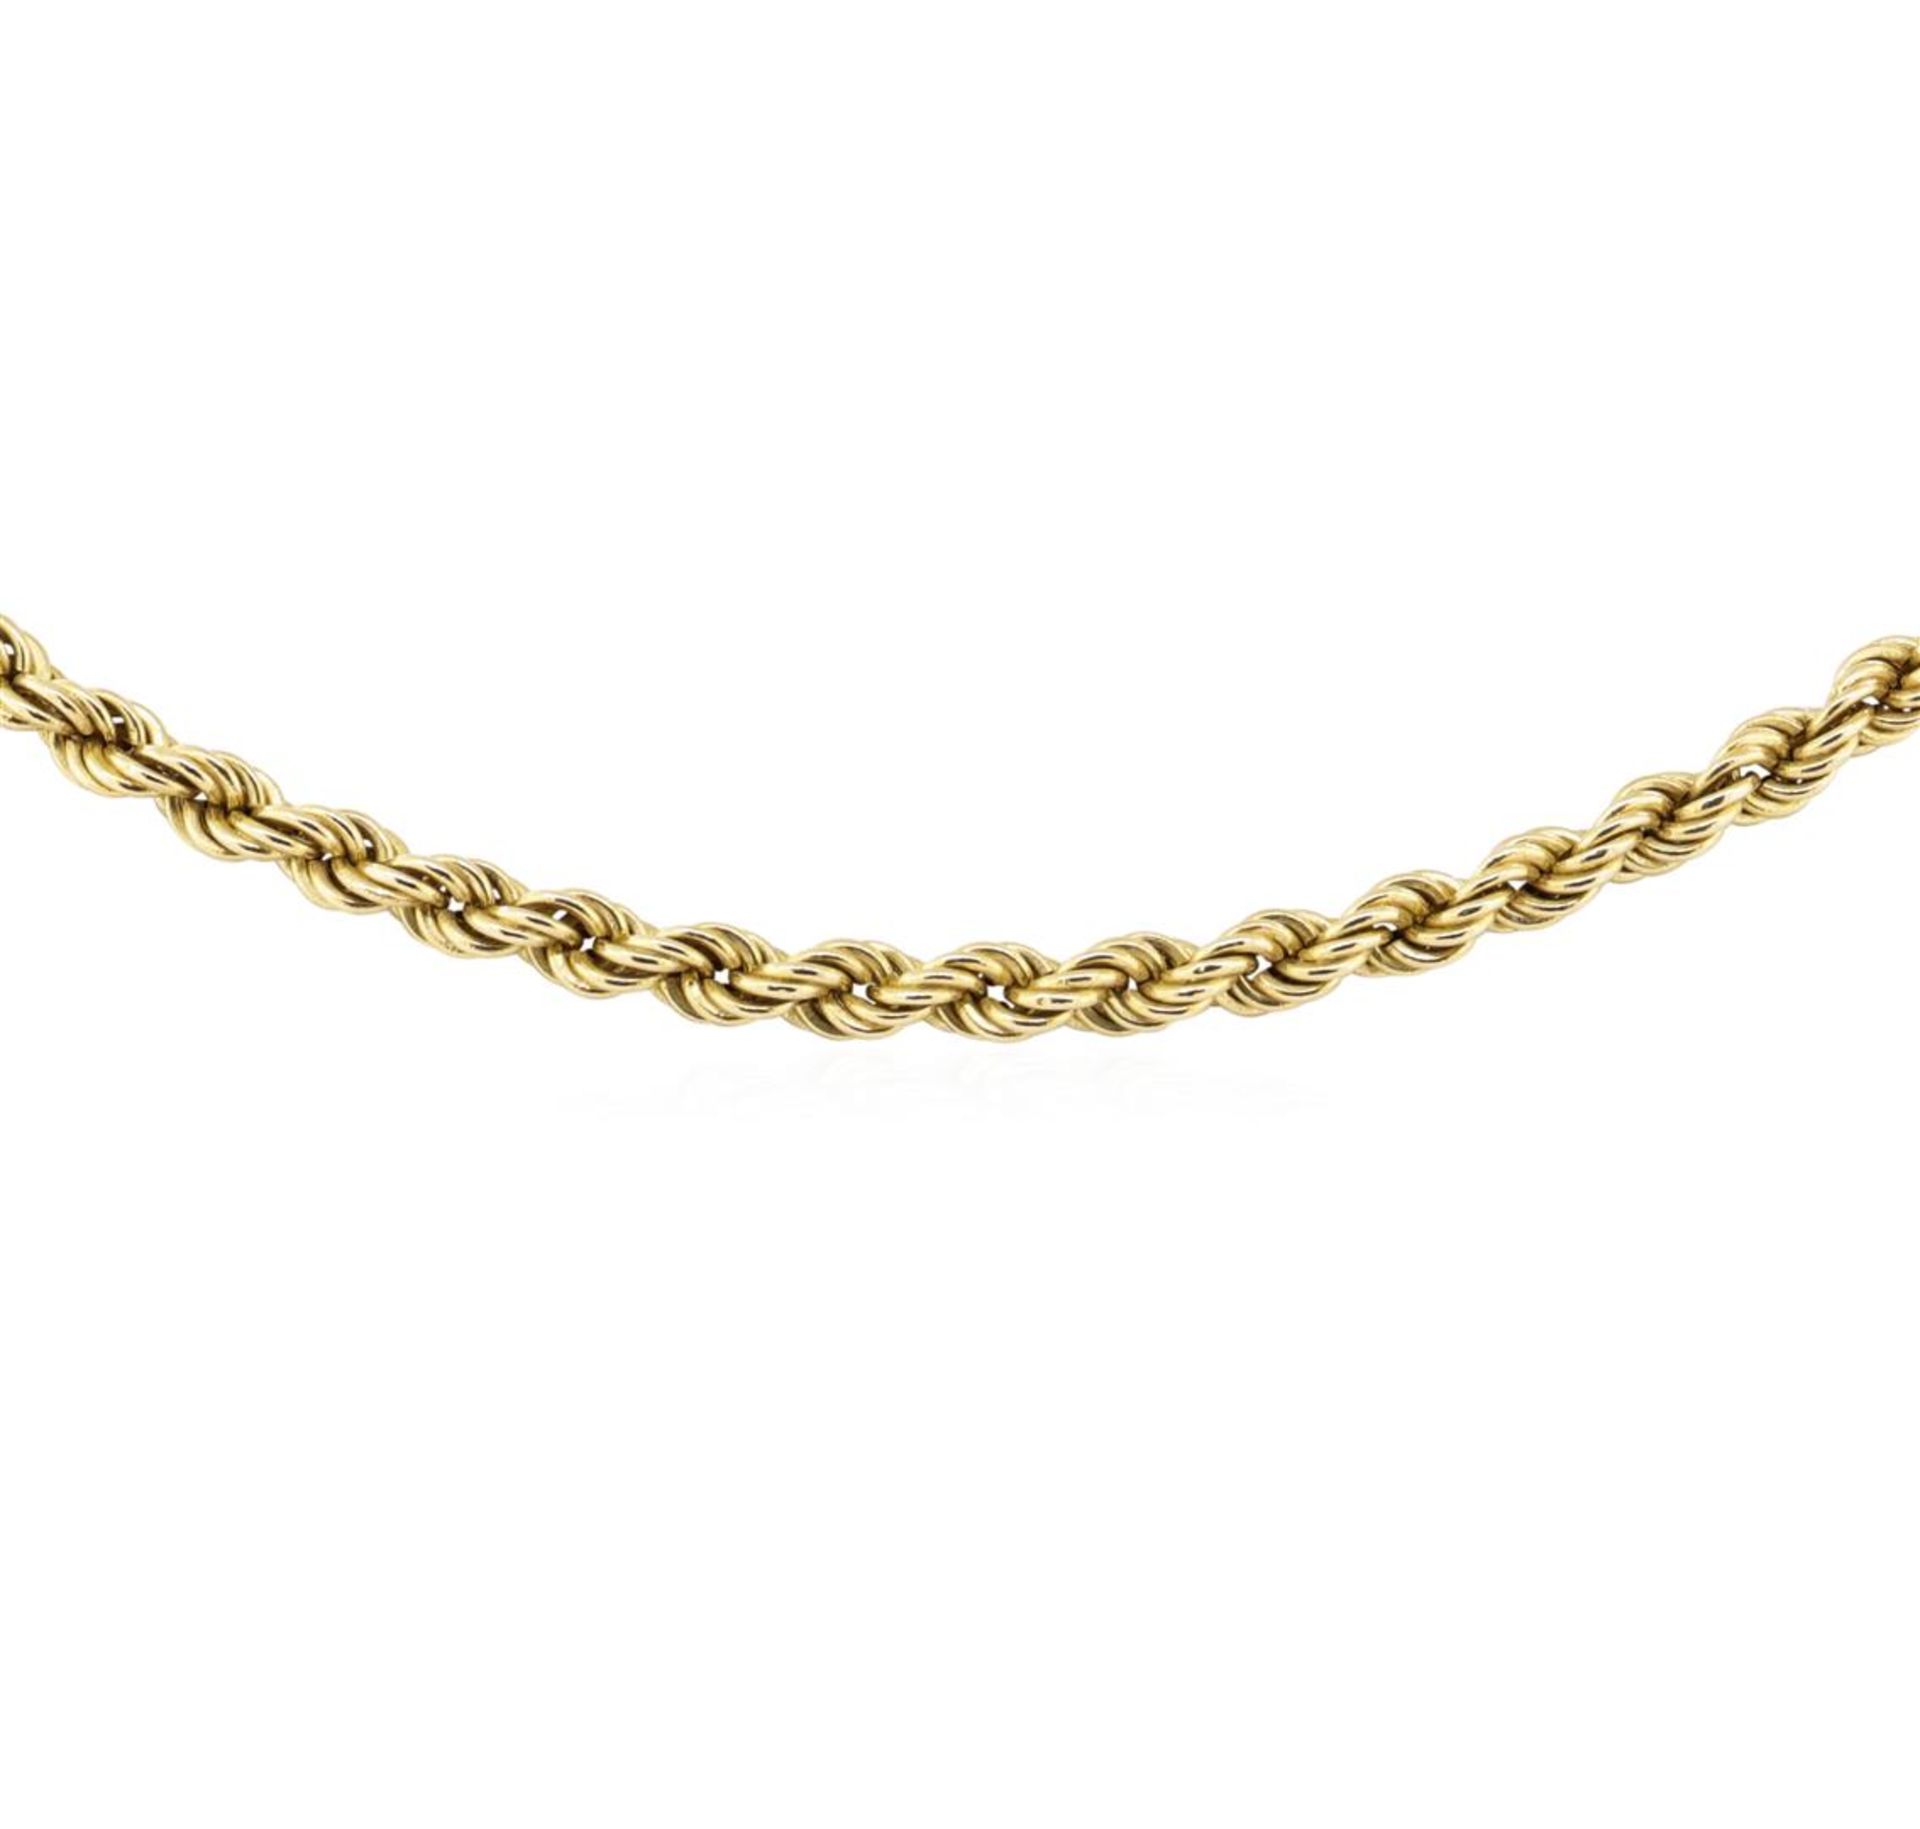 20 Inch Rope Chain - 14KT Yellow Gold - Image 2 of 2